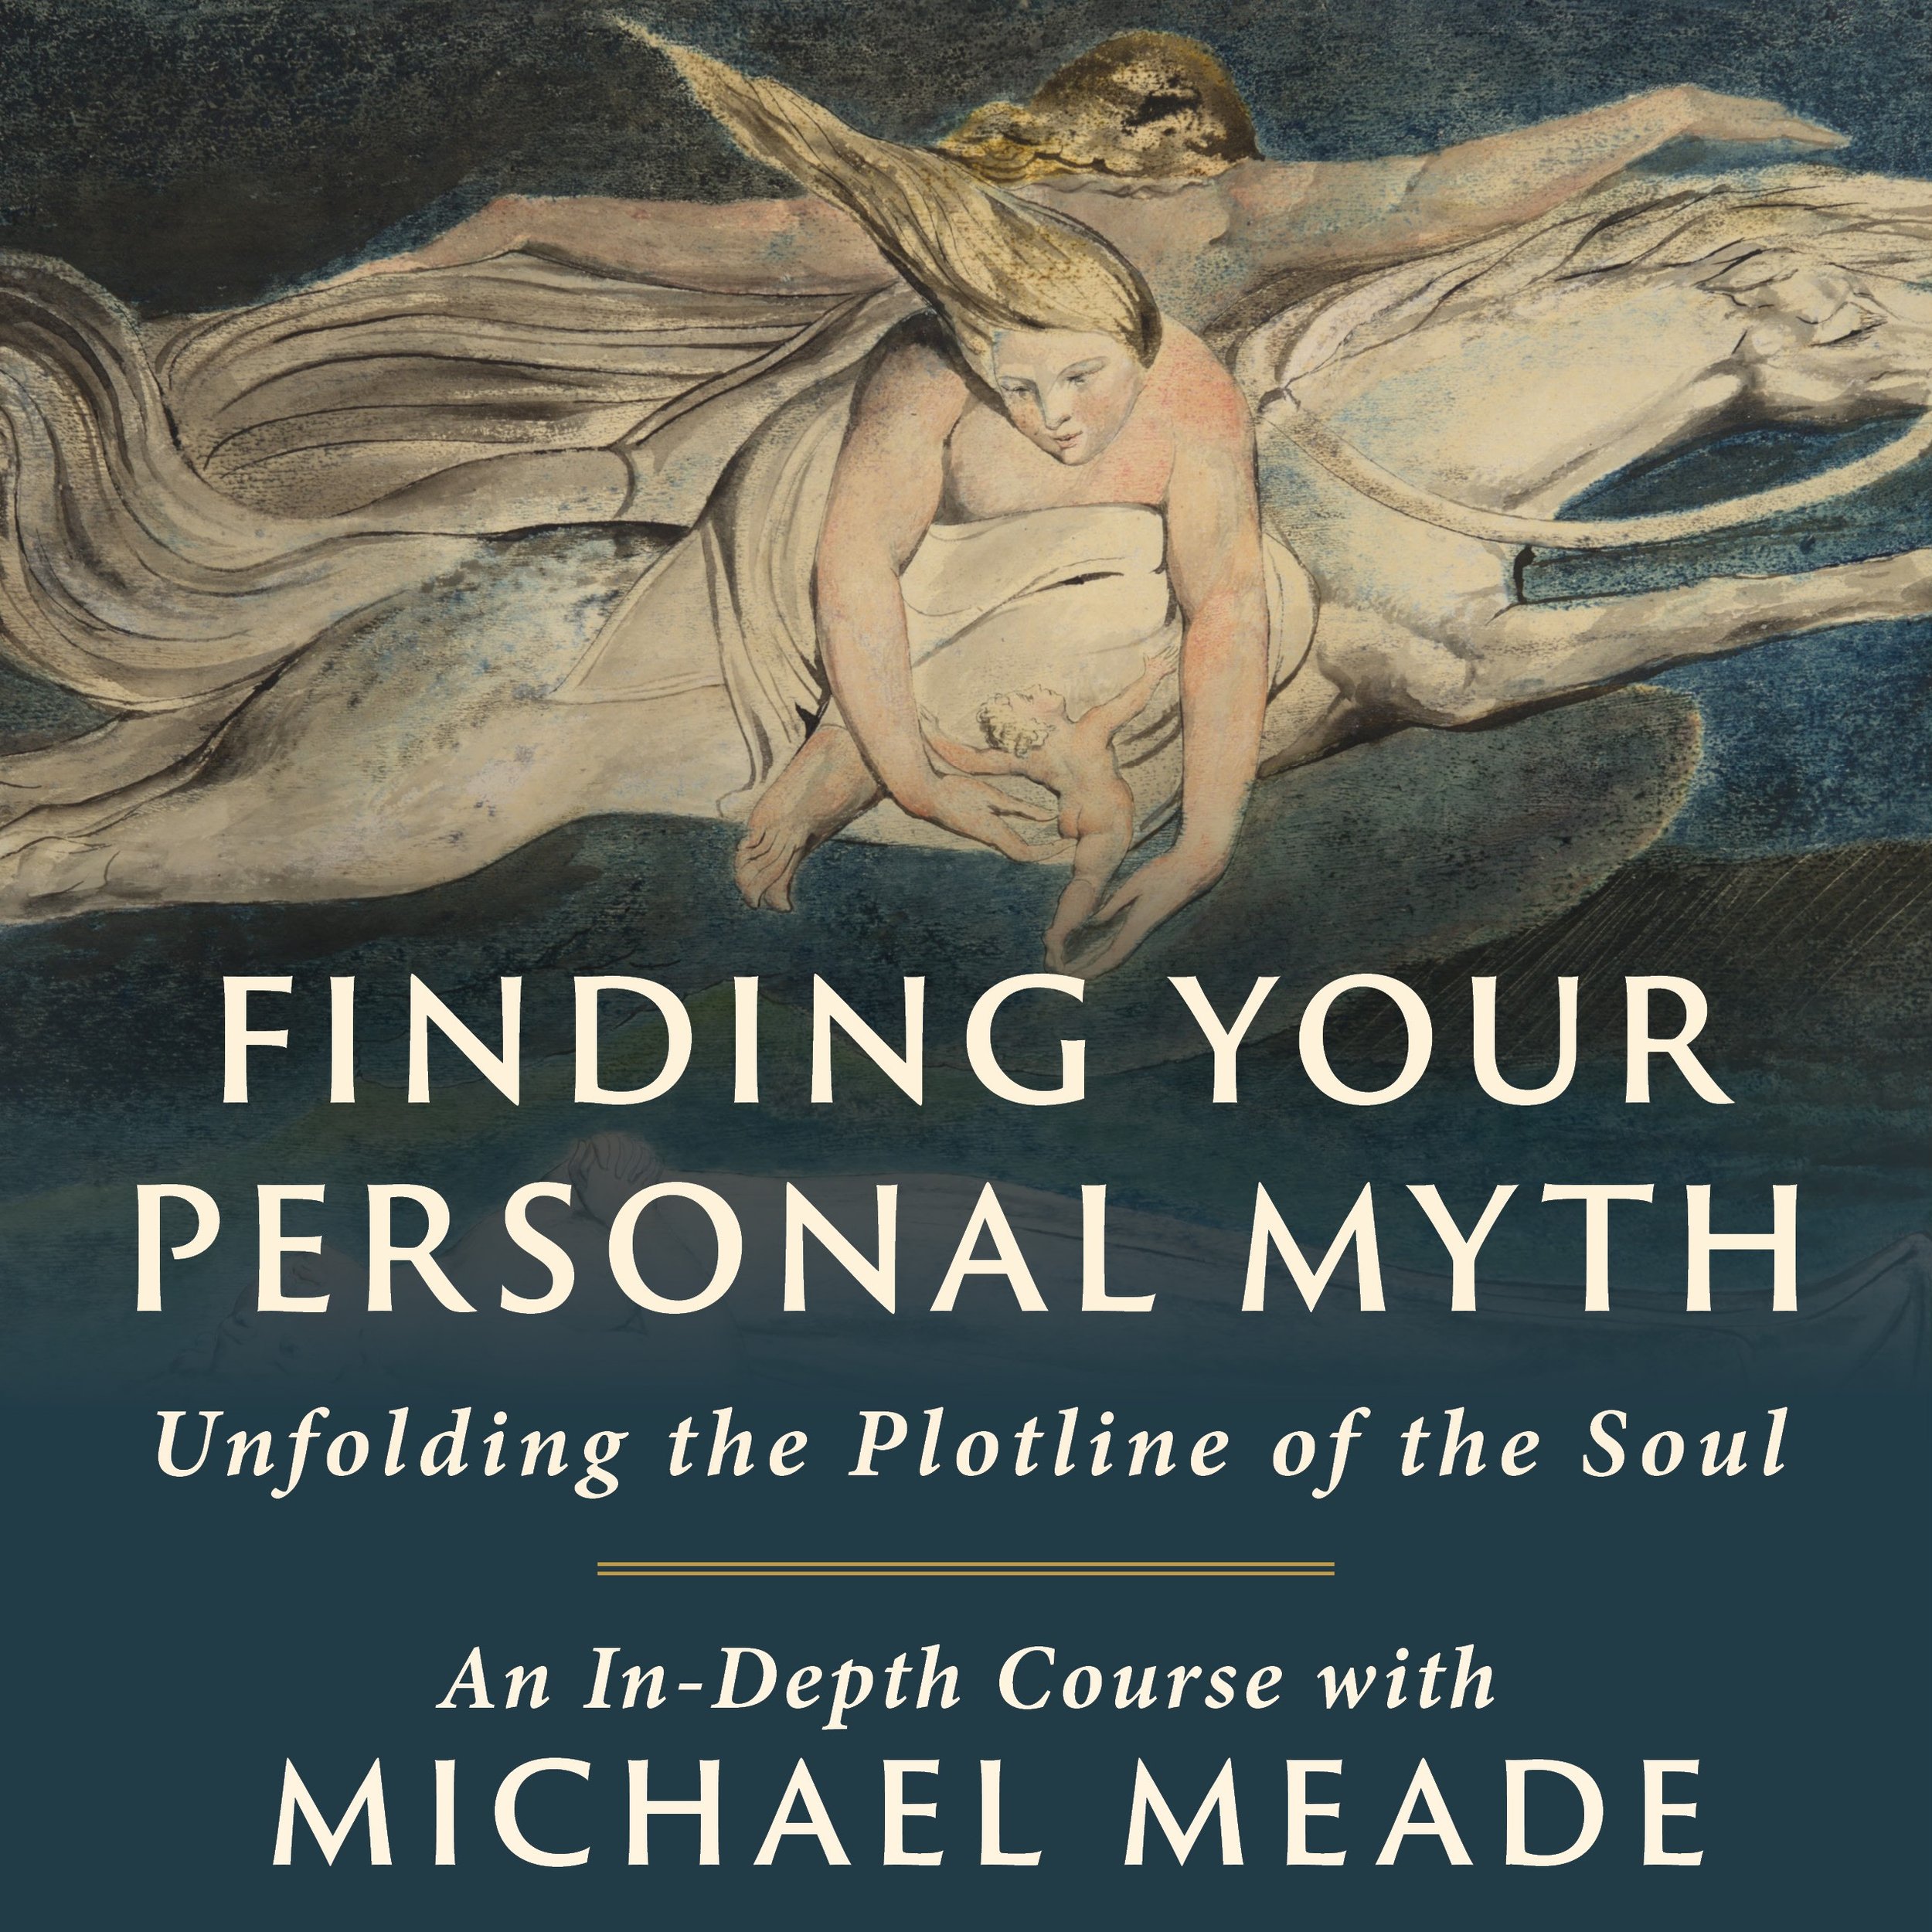 Mythical Findings